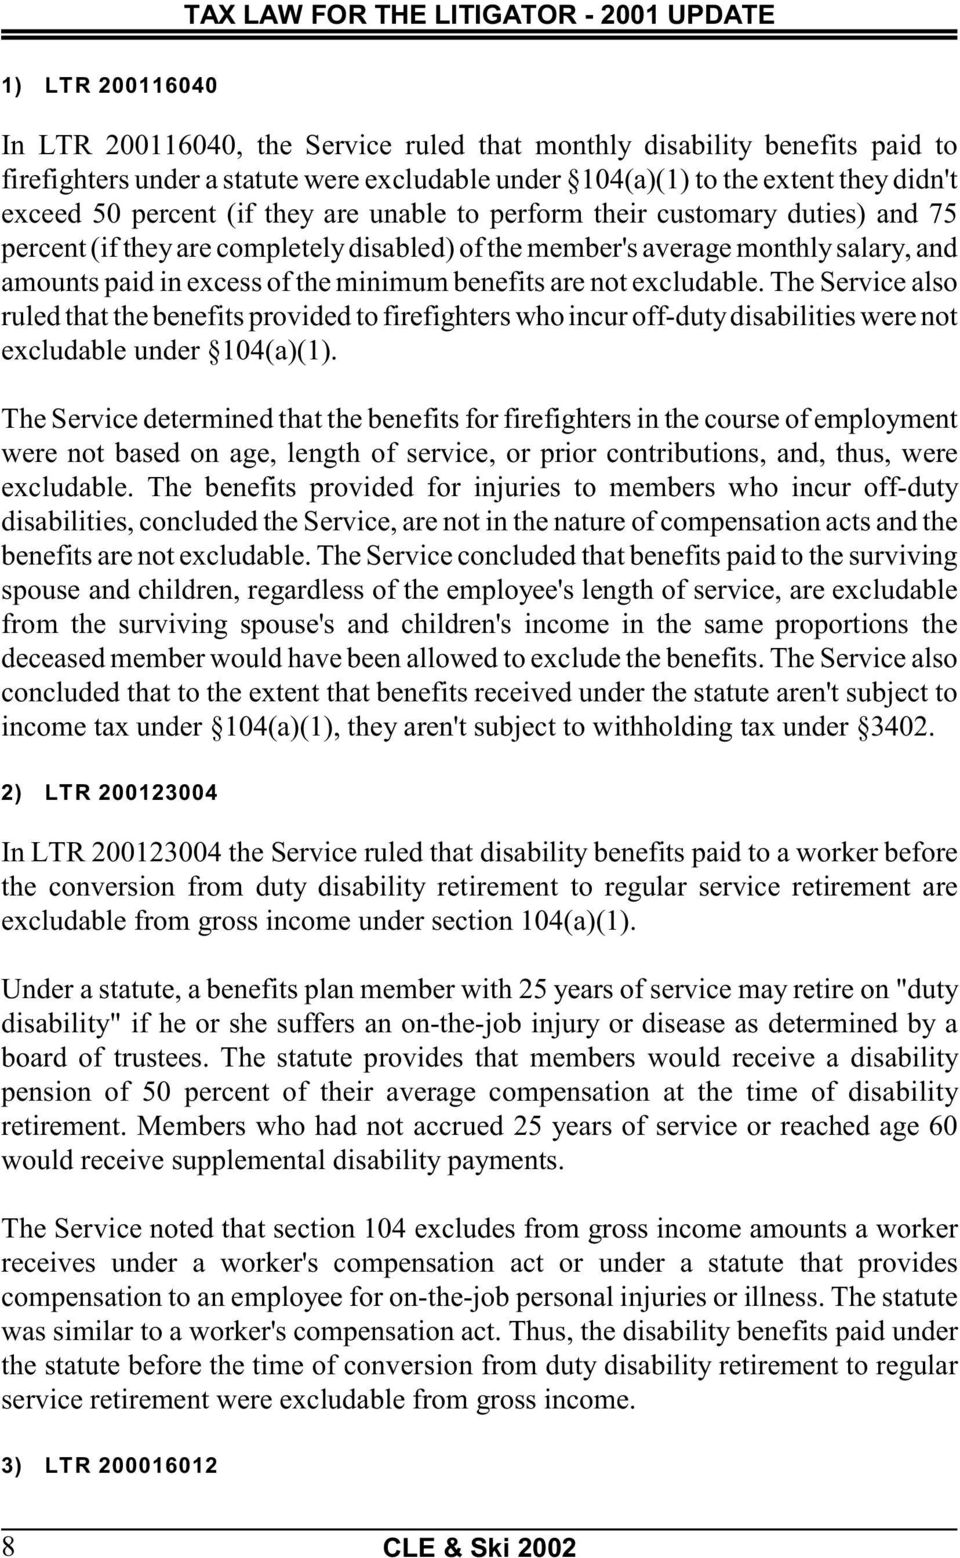 not excludable. The Service also ruled that the benefits provided to firefighters who incur off-duty disabilities were not excludable under 104(a)(1).